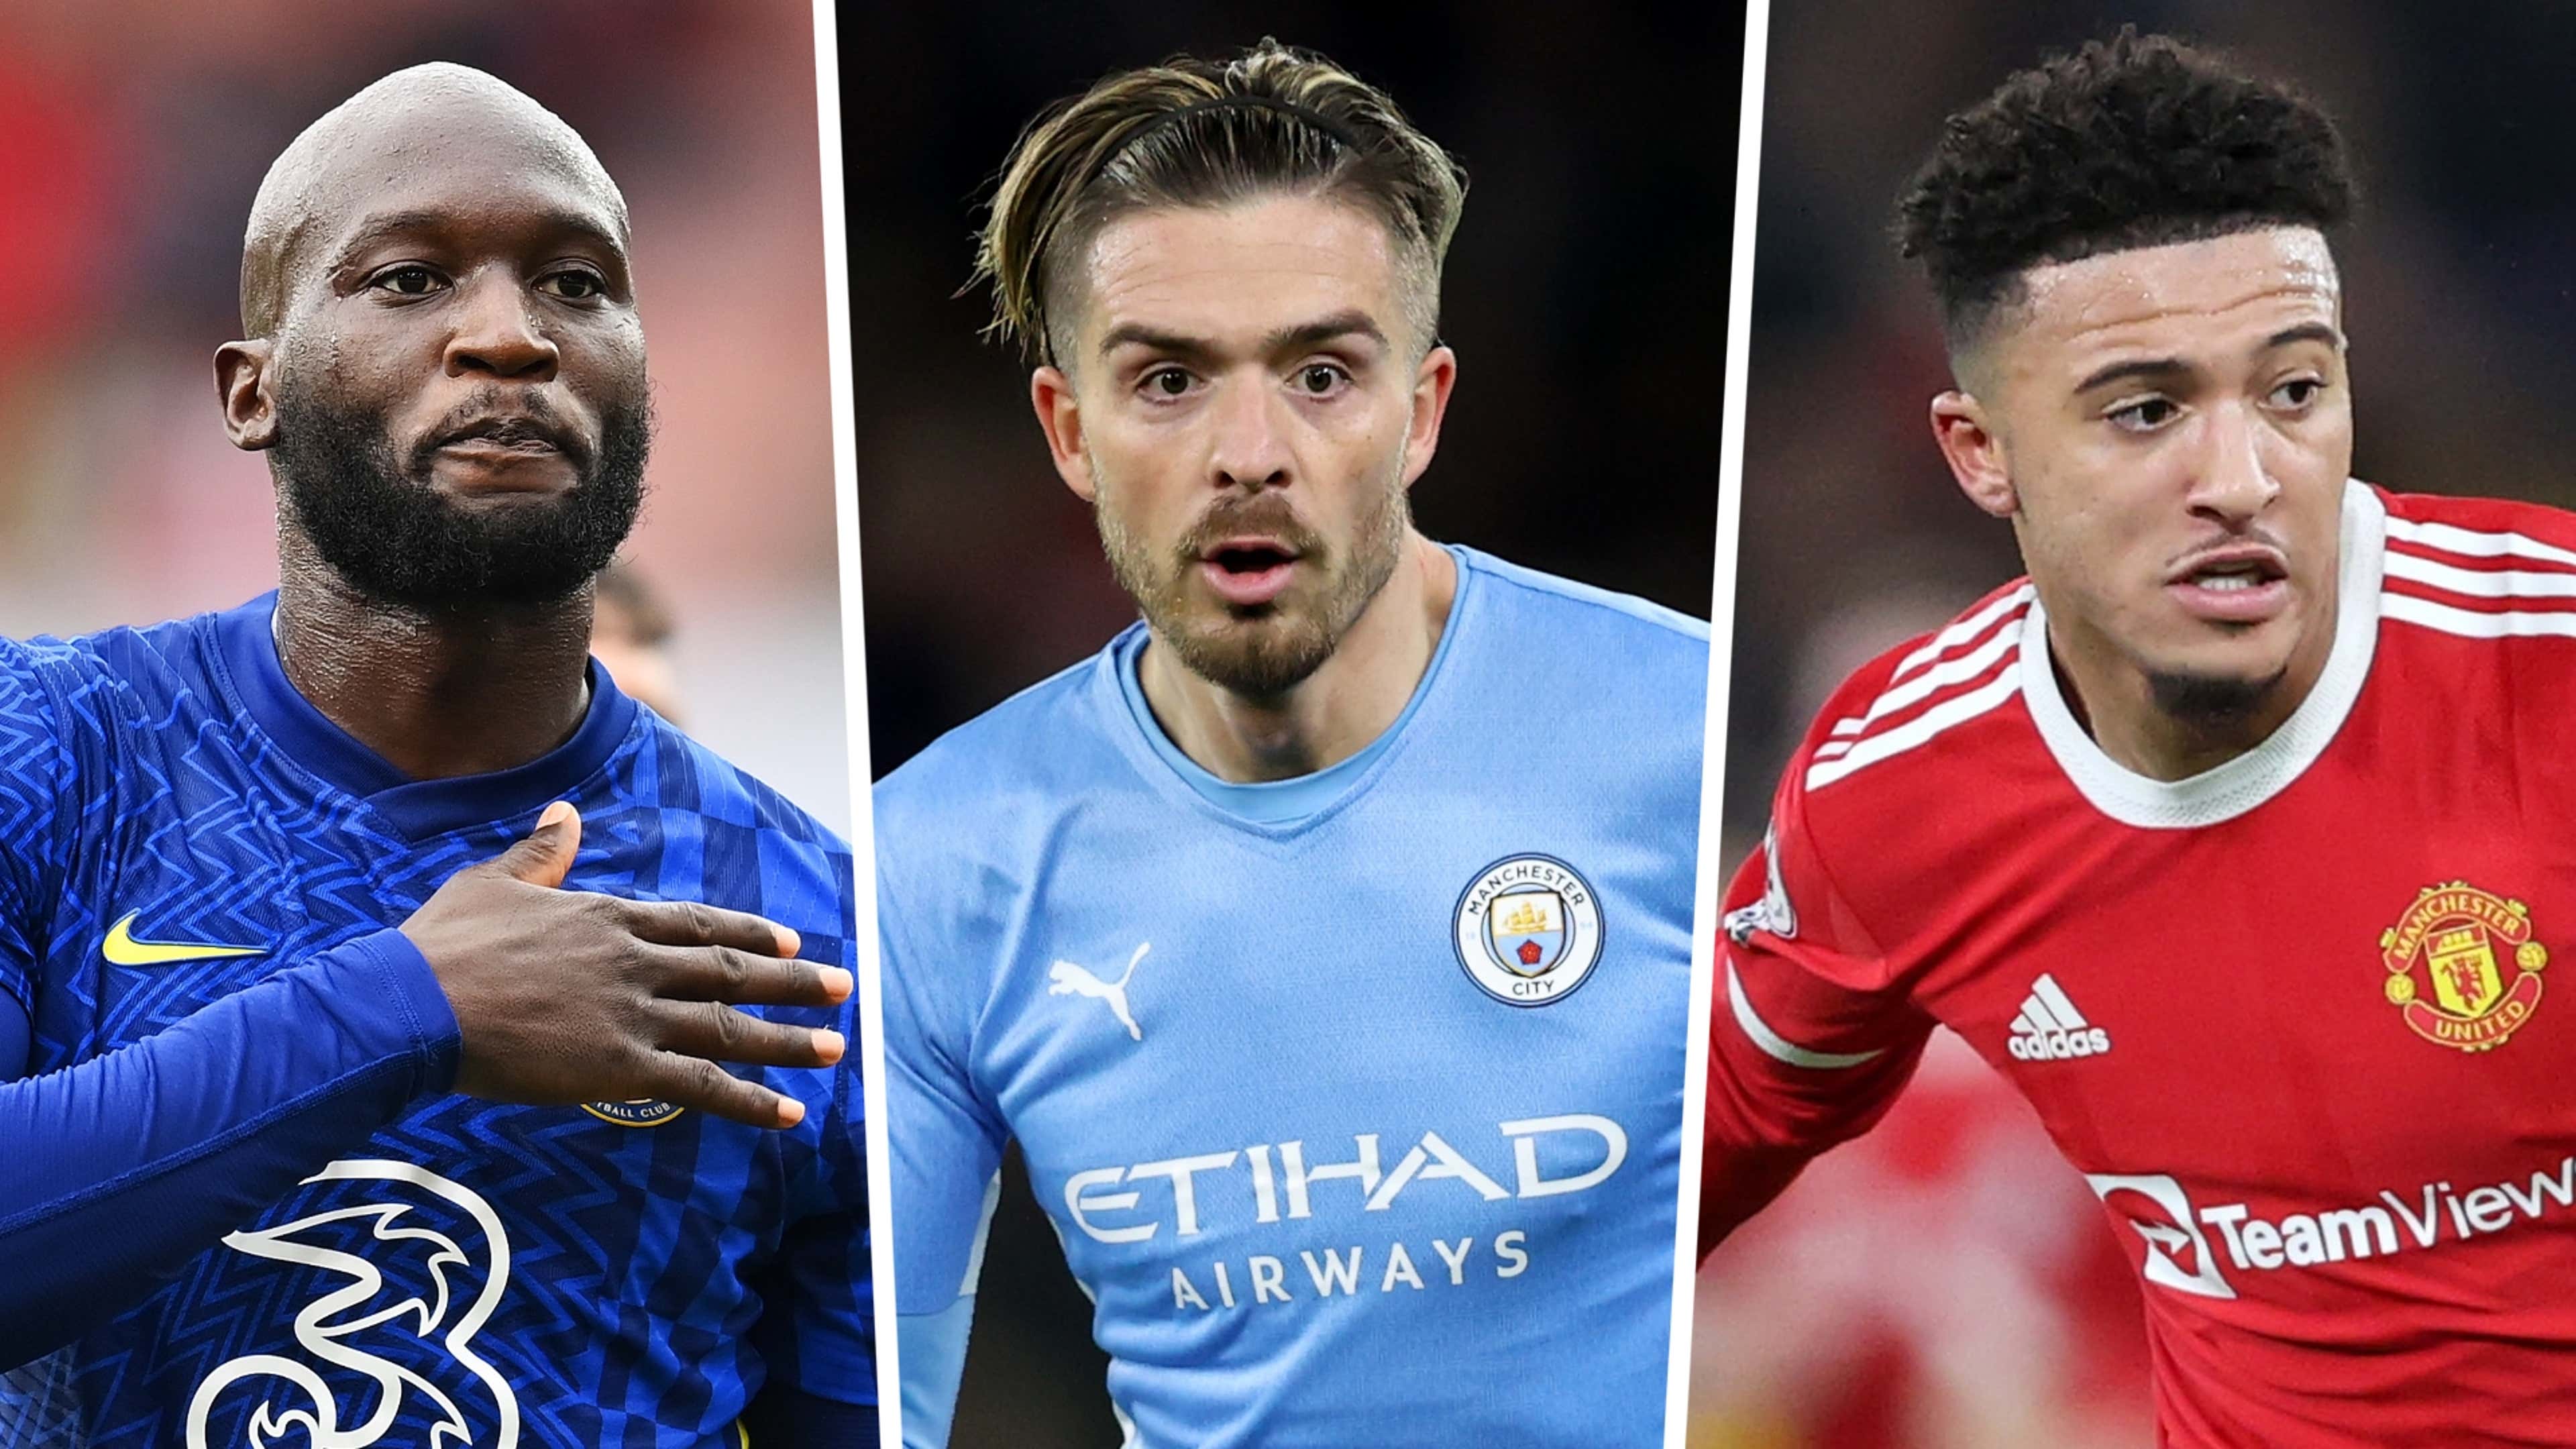 Which Premier League club's shirts are the most expensive?